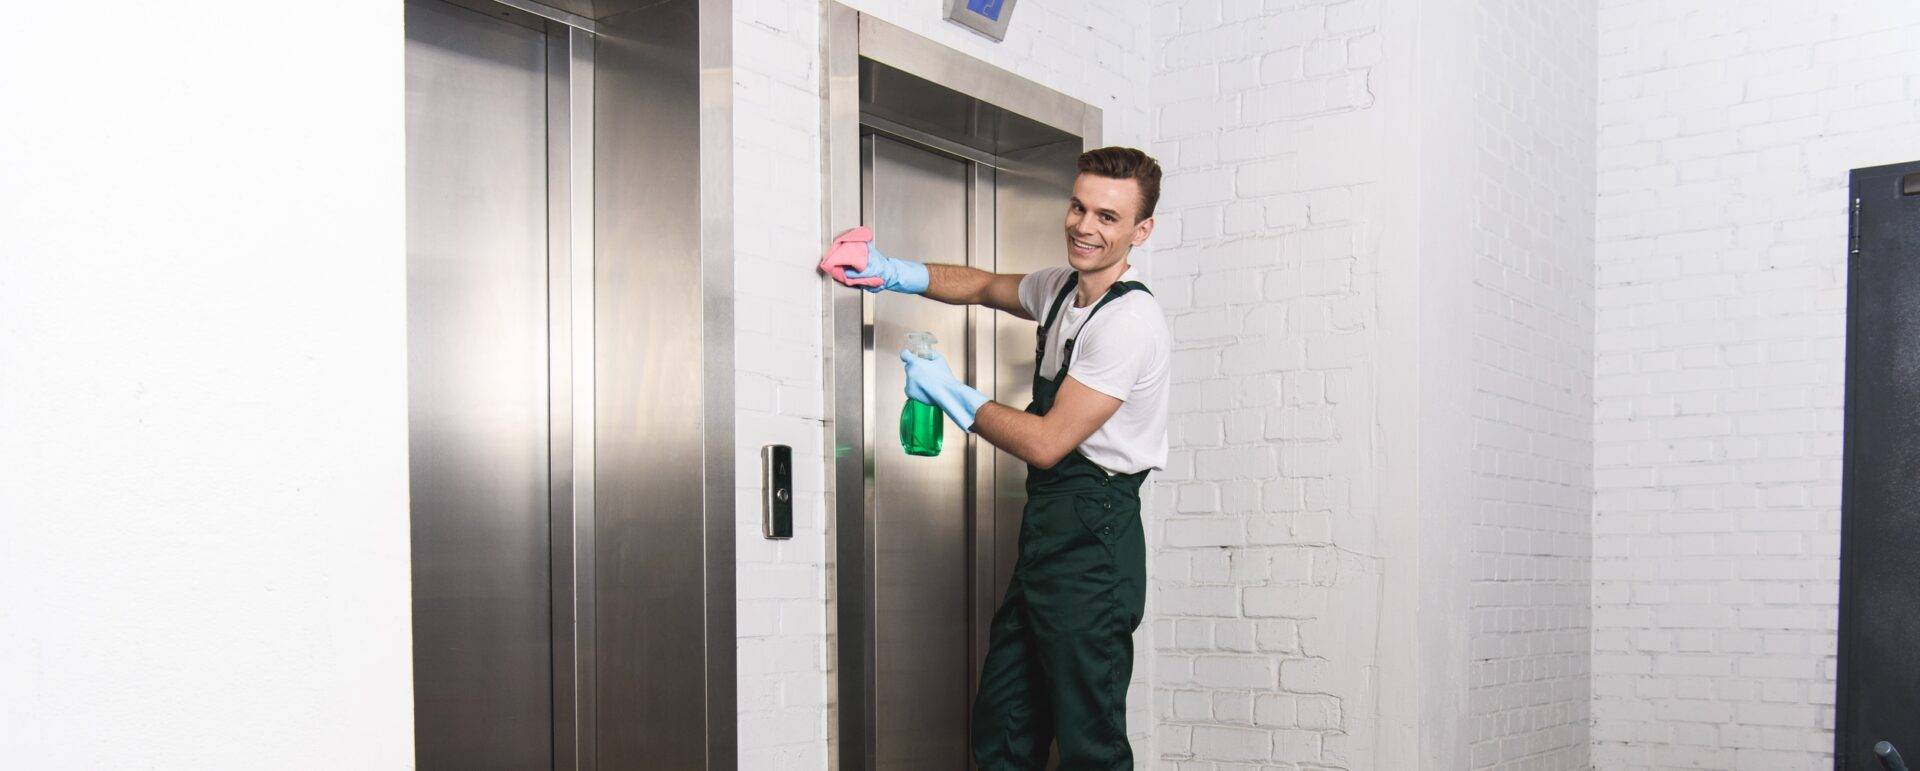 handsome young janitor cleaning elevator and smiling at camera